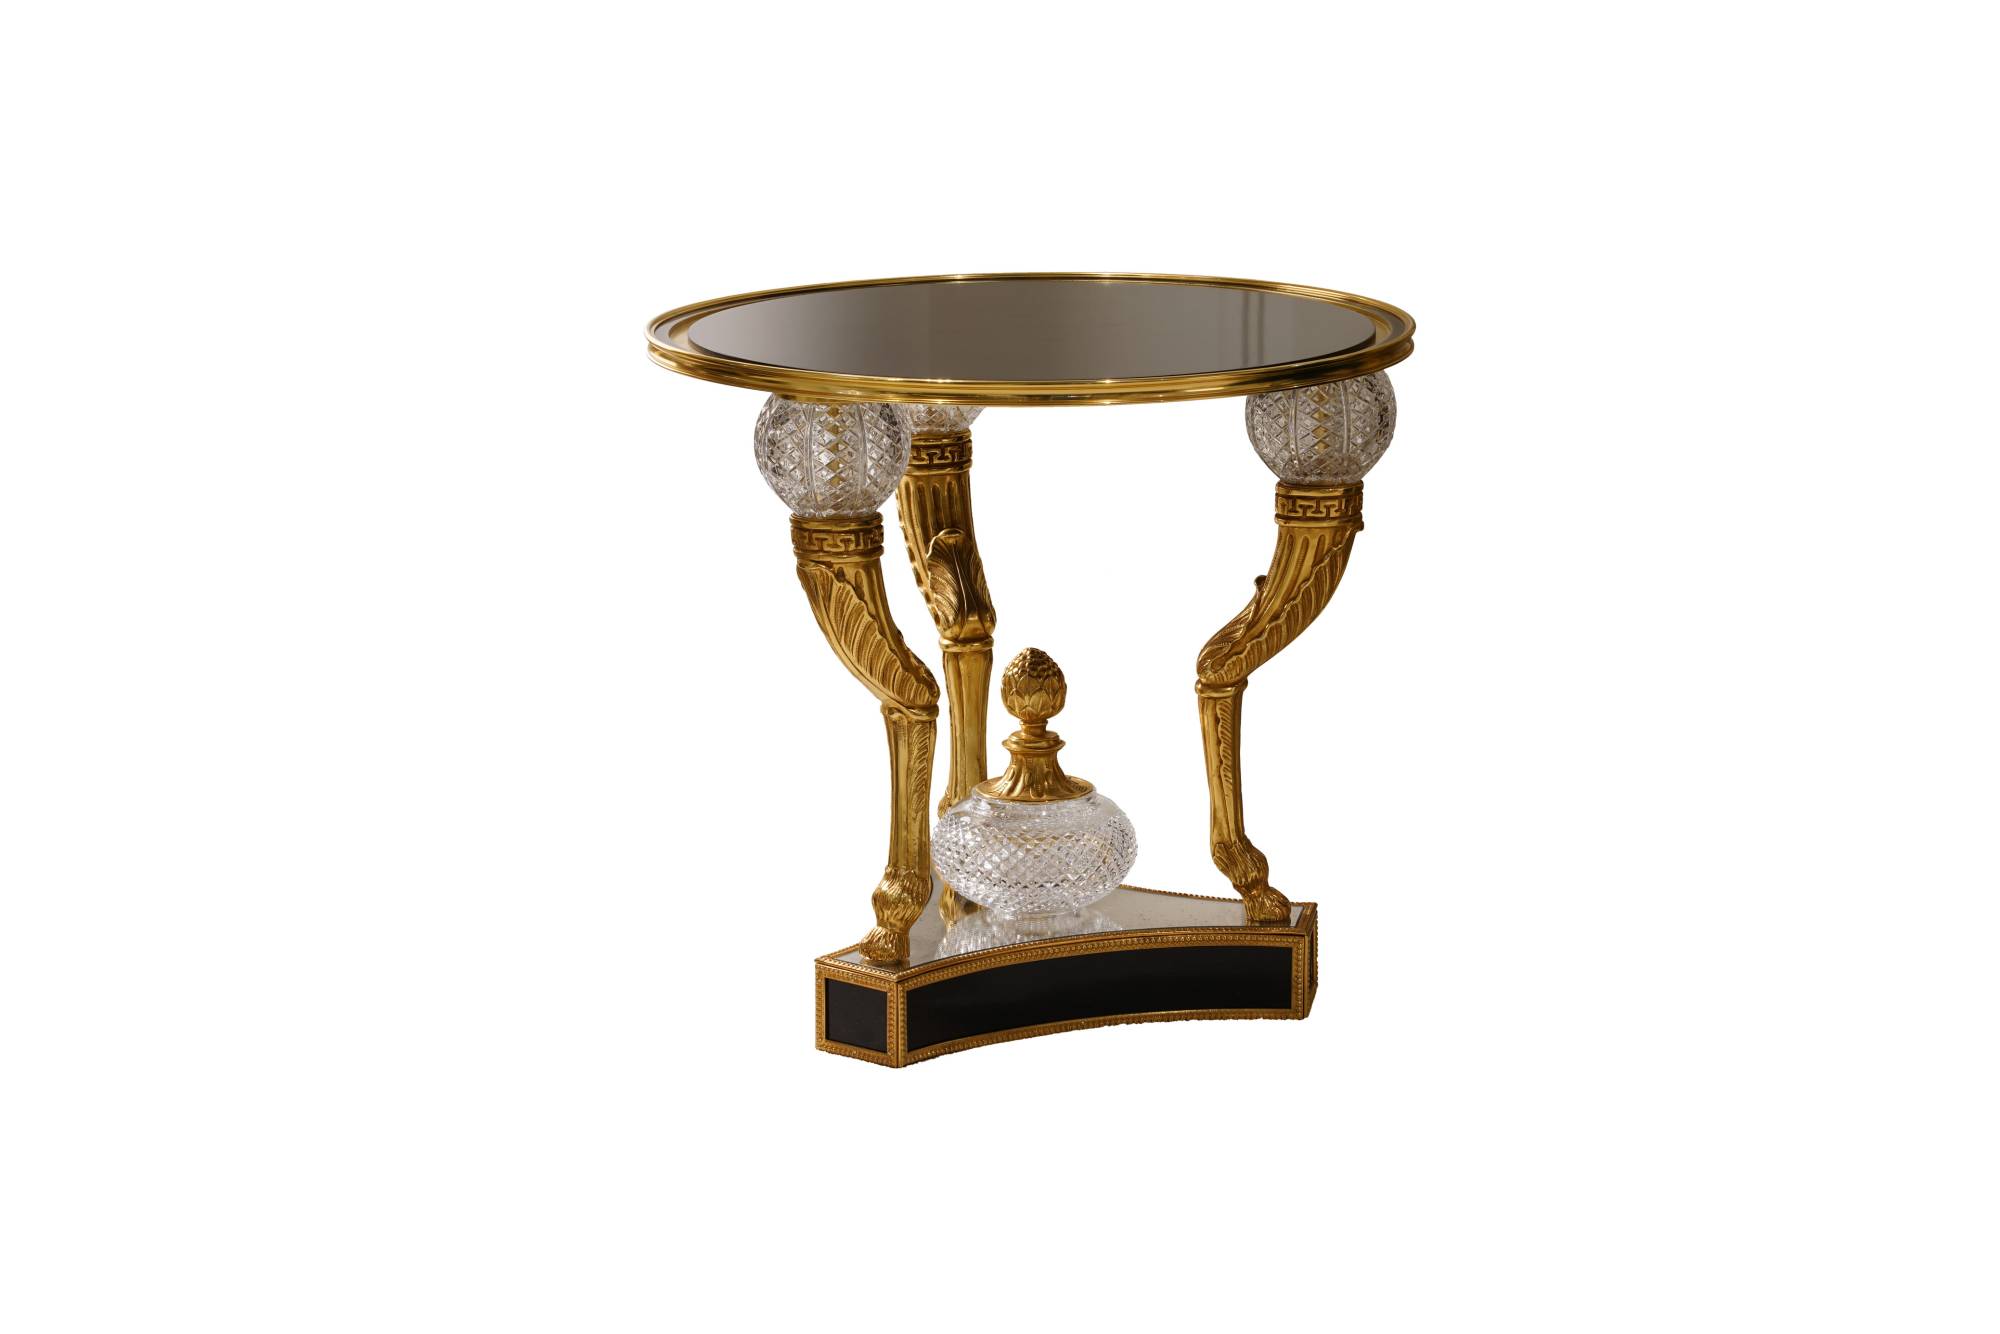 ART. 2212 – The elegance of luxury classic Small tables made in Italy by C.G. Capelletti.